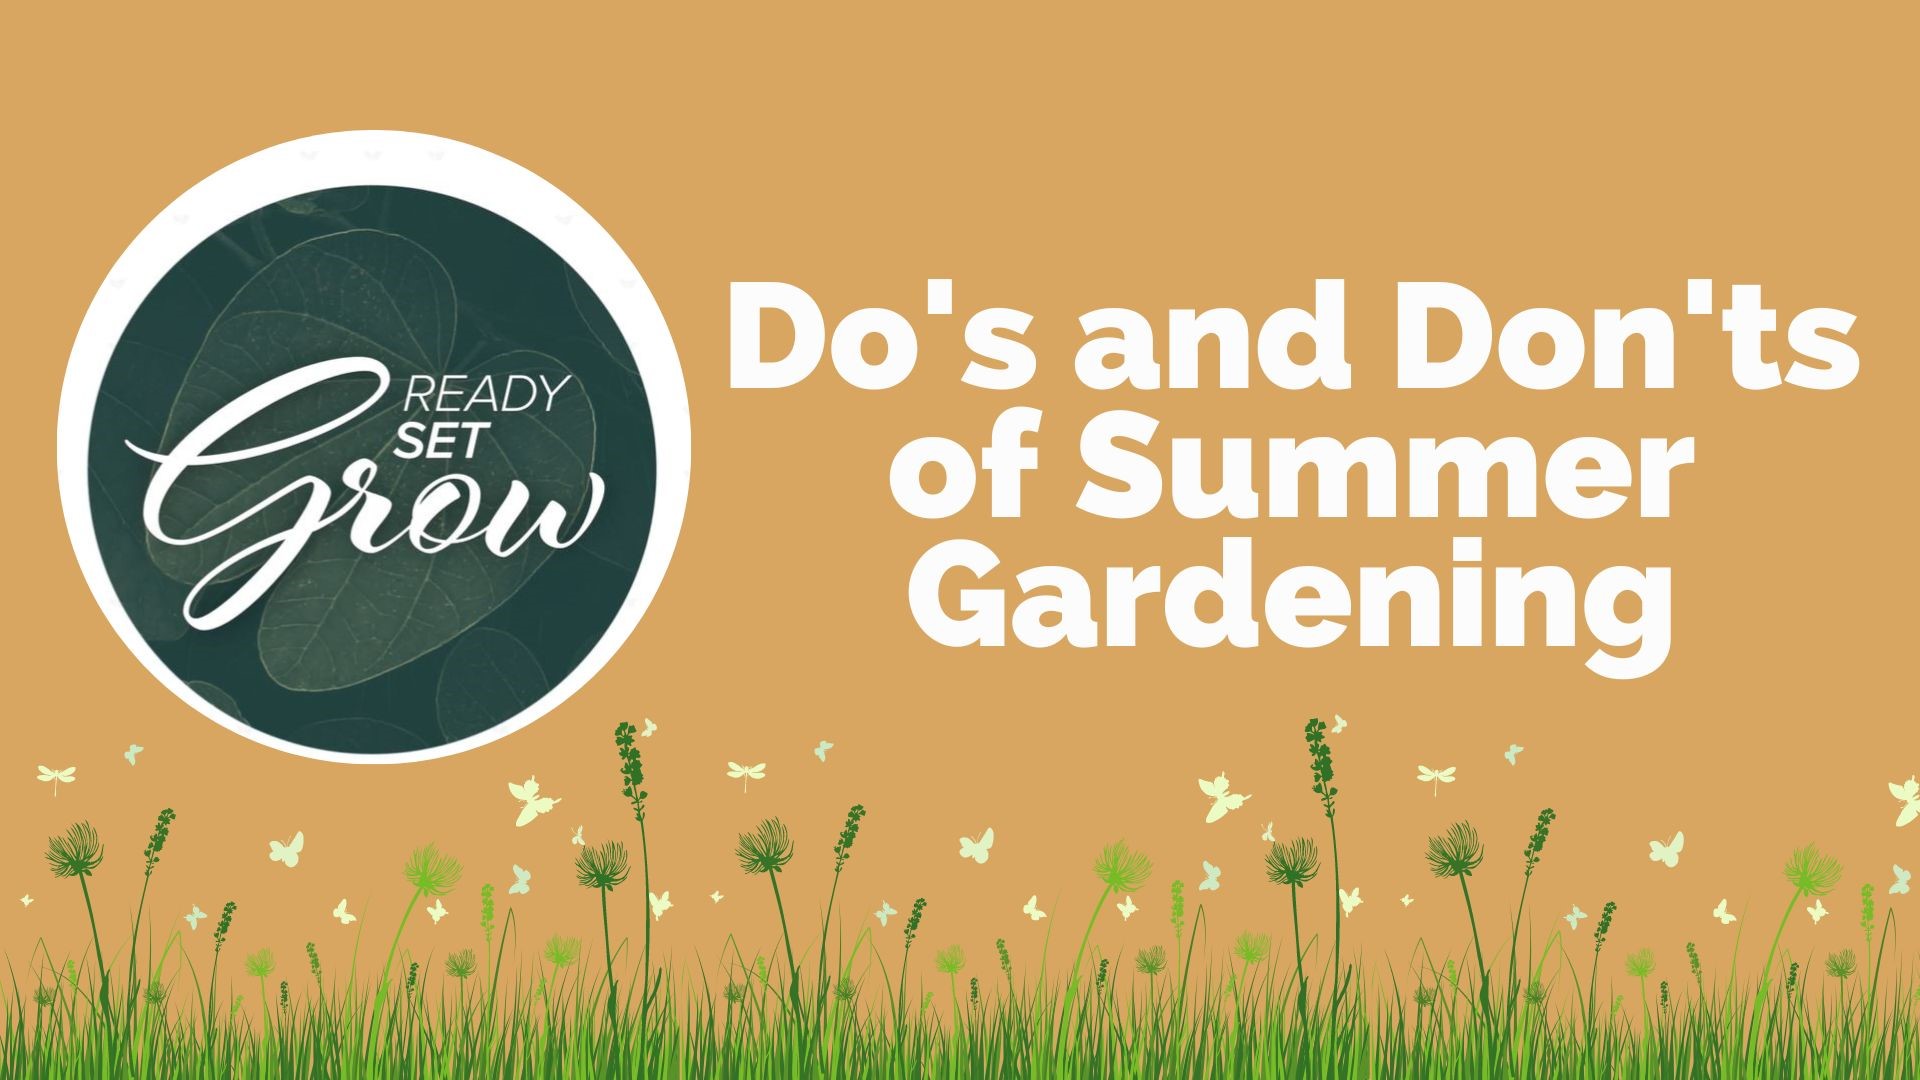 How to best take care of your garden and yard in the summer, from ways to grow grass to the mulch to avoid and the vegetables you can still grow.